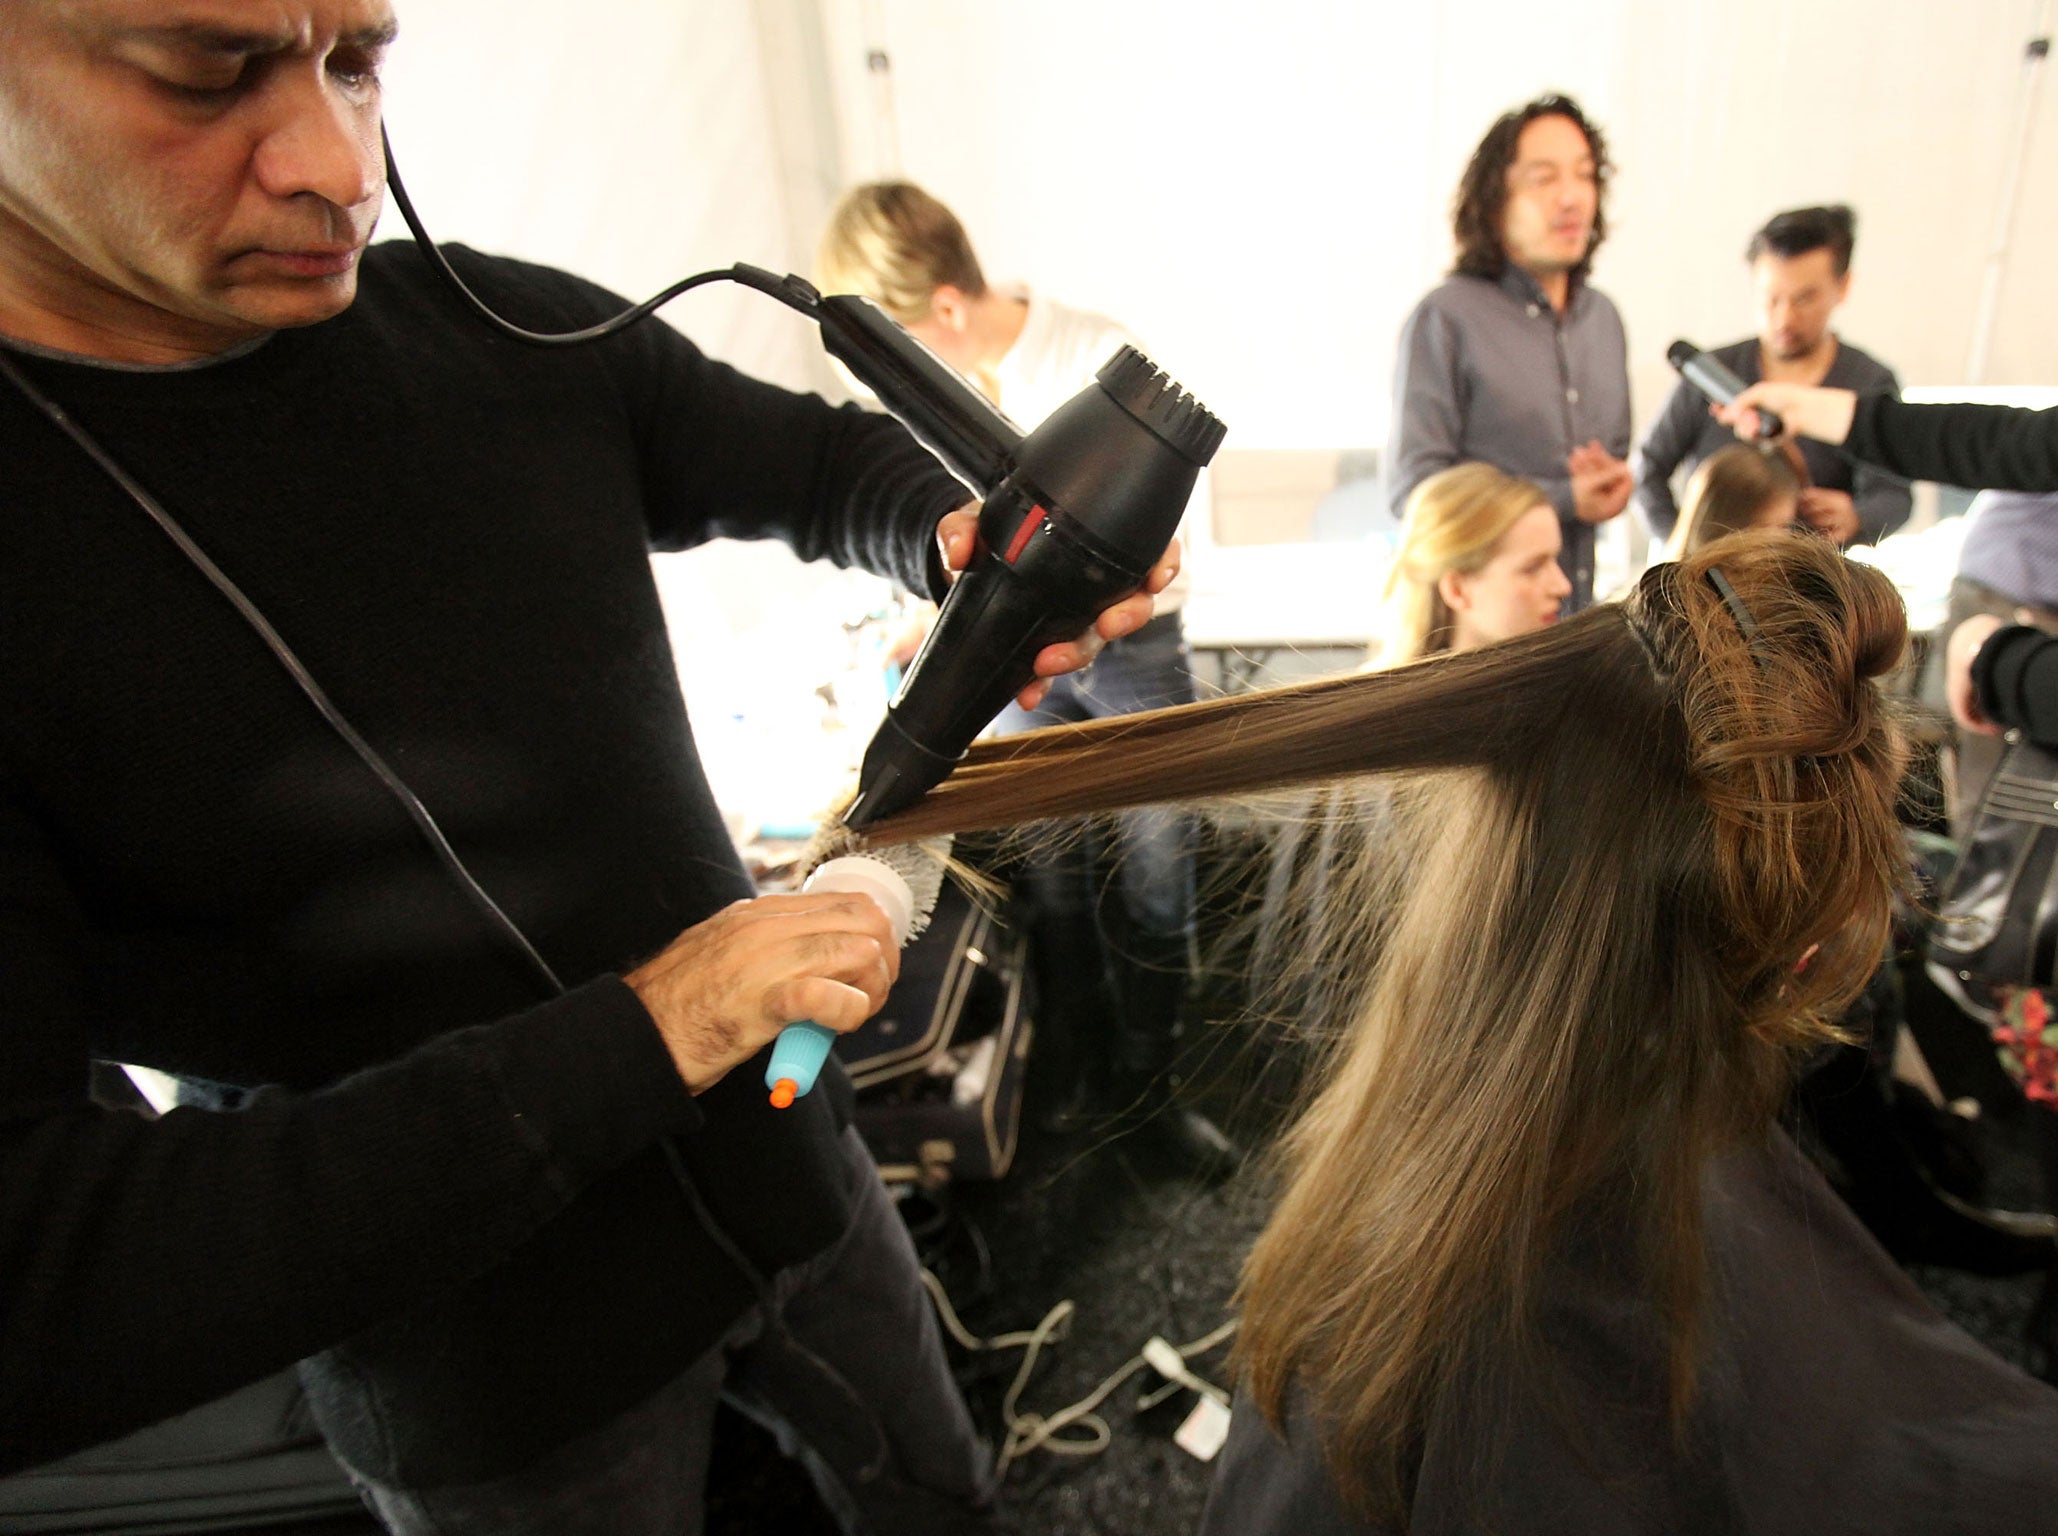 Powerful hairdryers may be banned by the EU